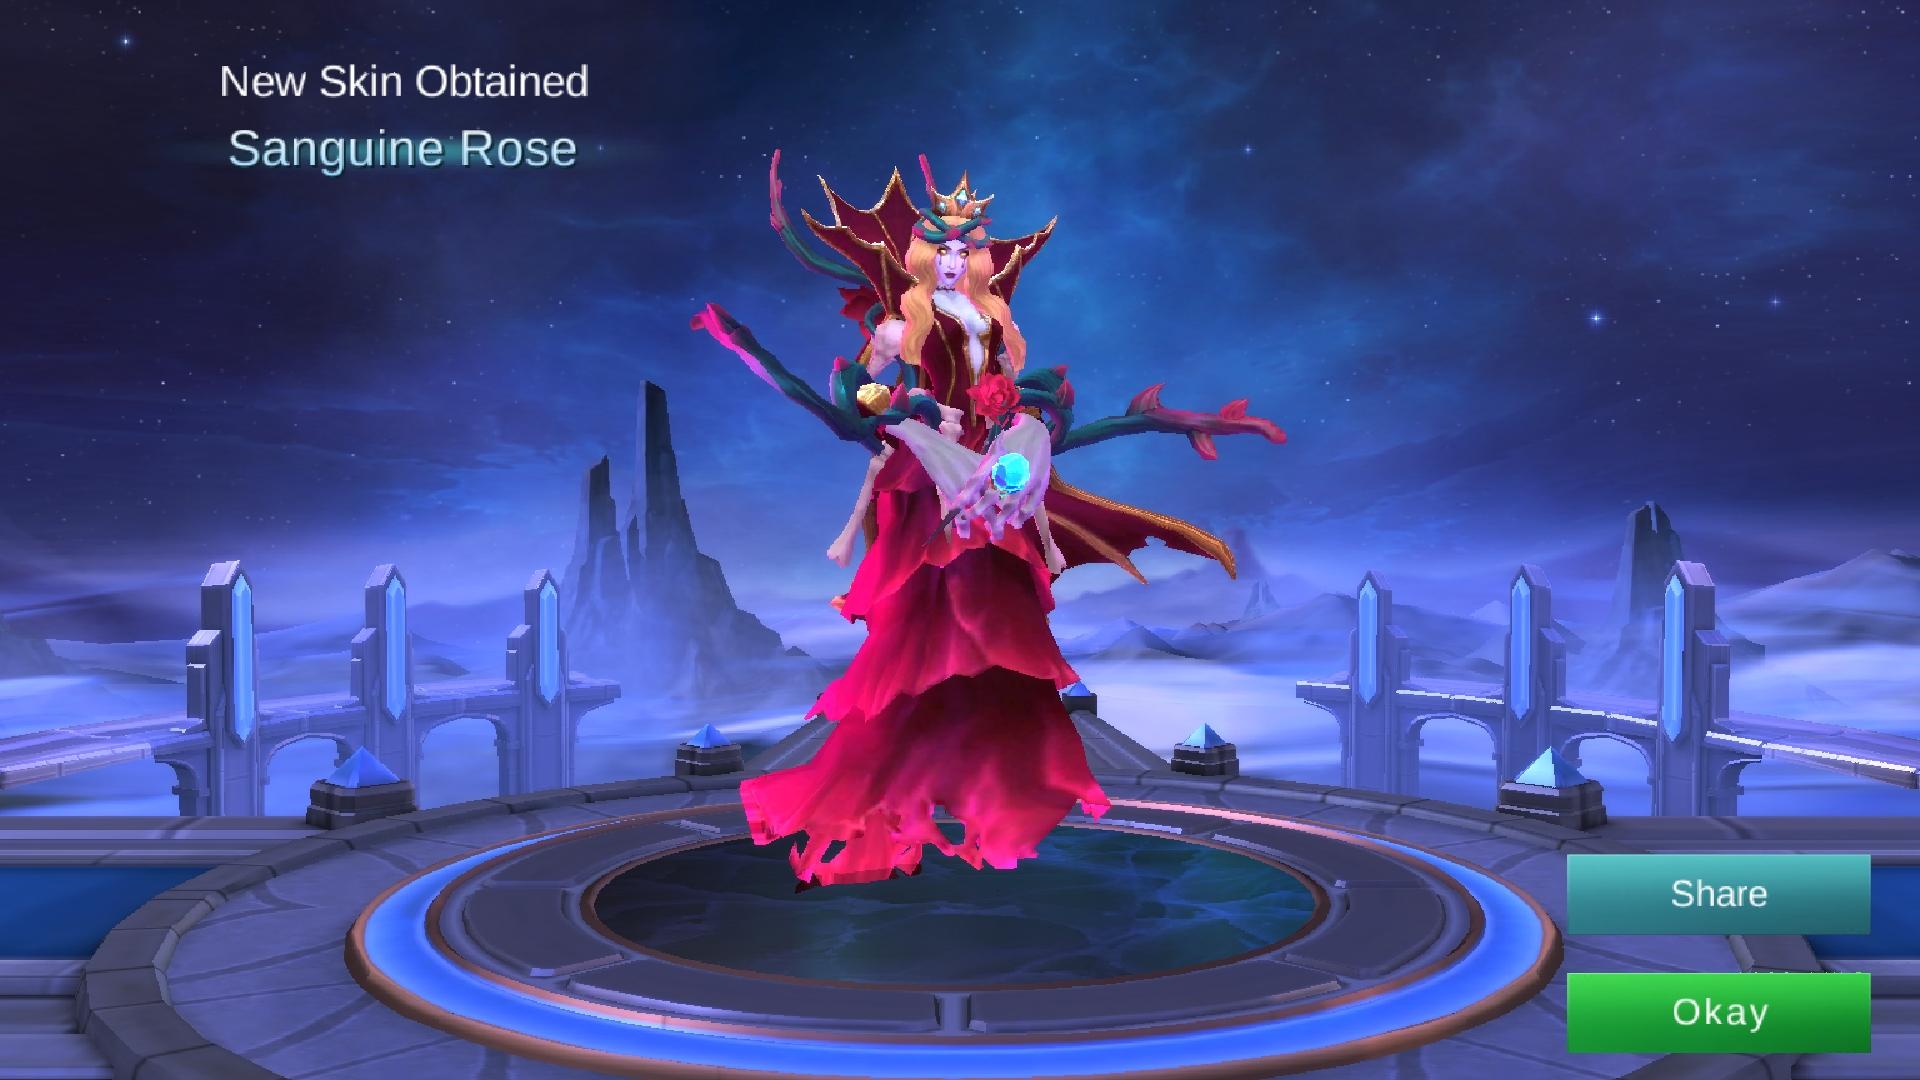 The Queen is here. SANGUINE ROSE